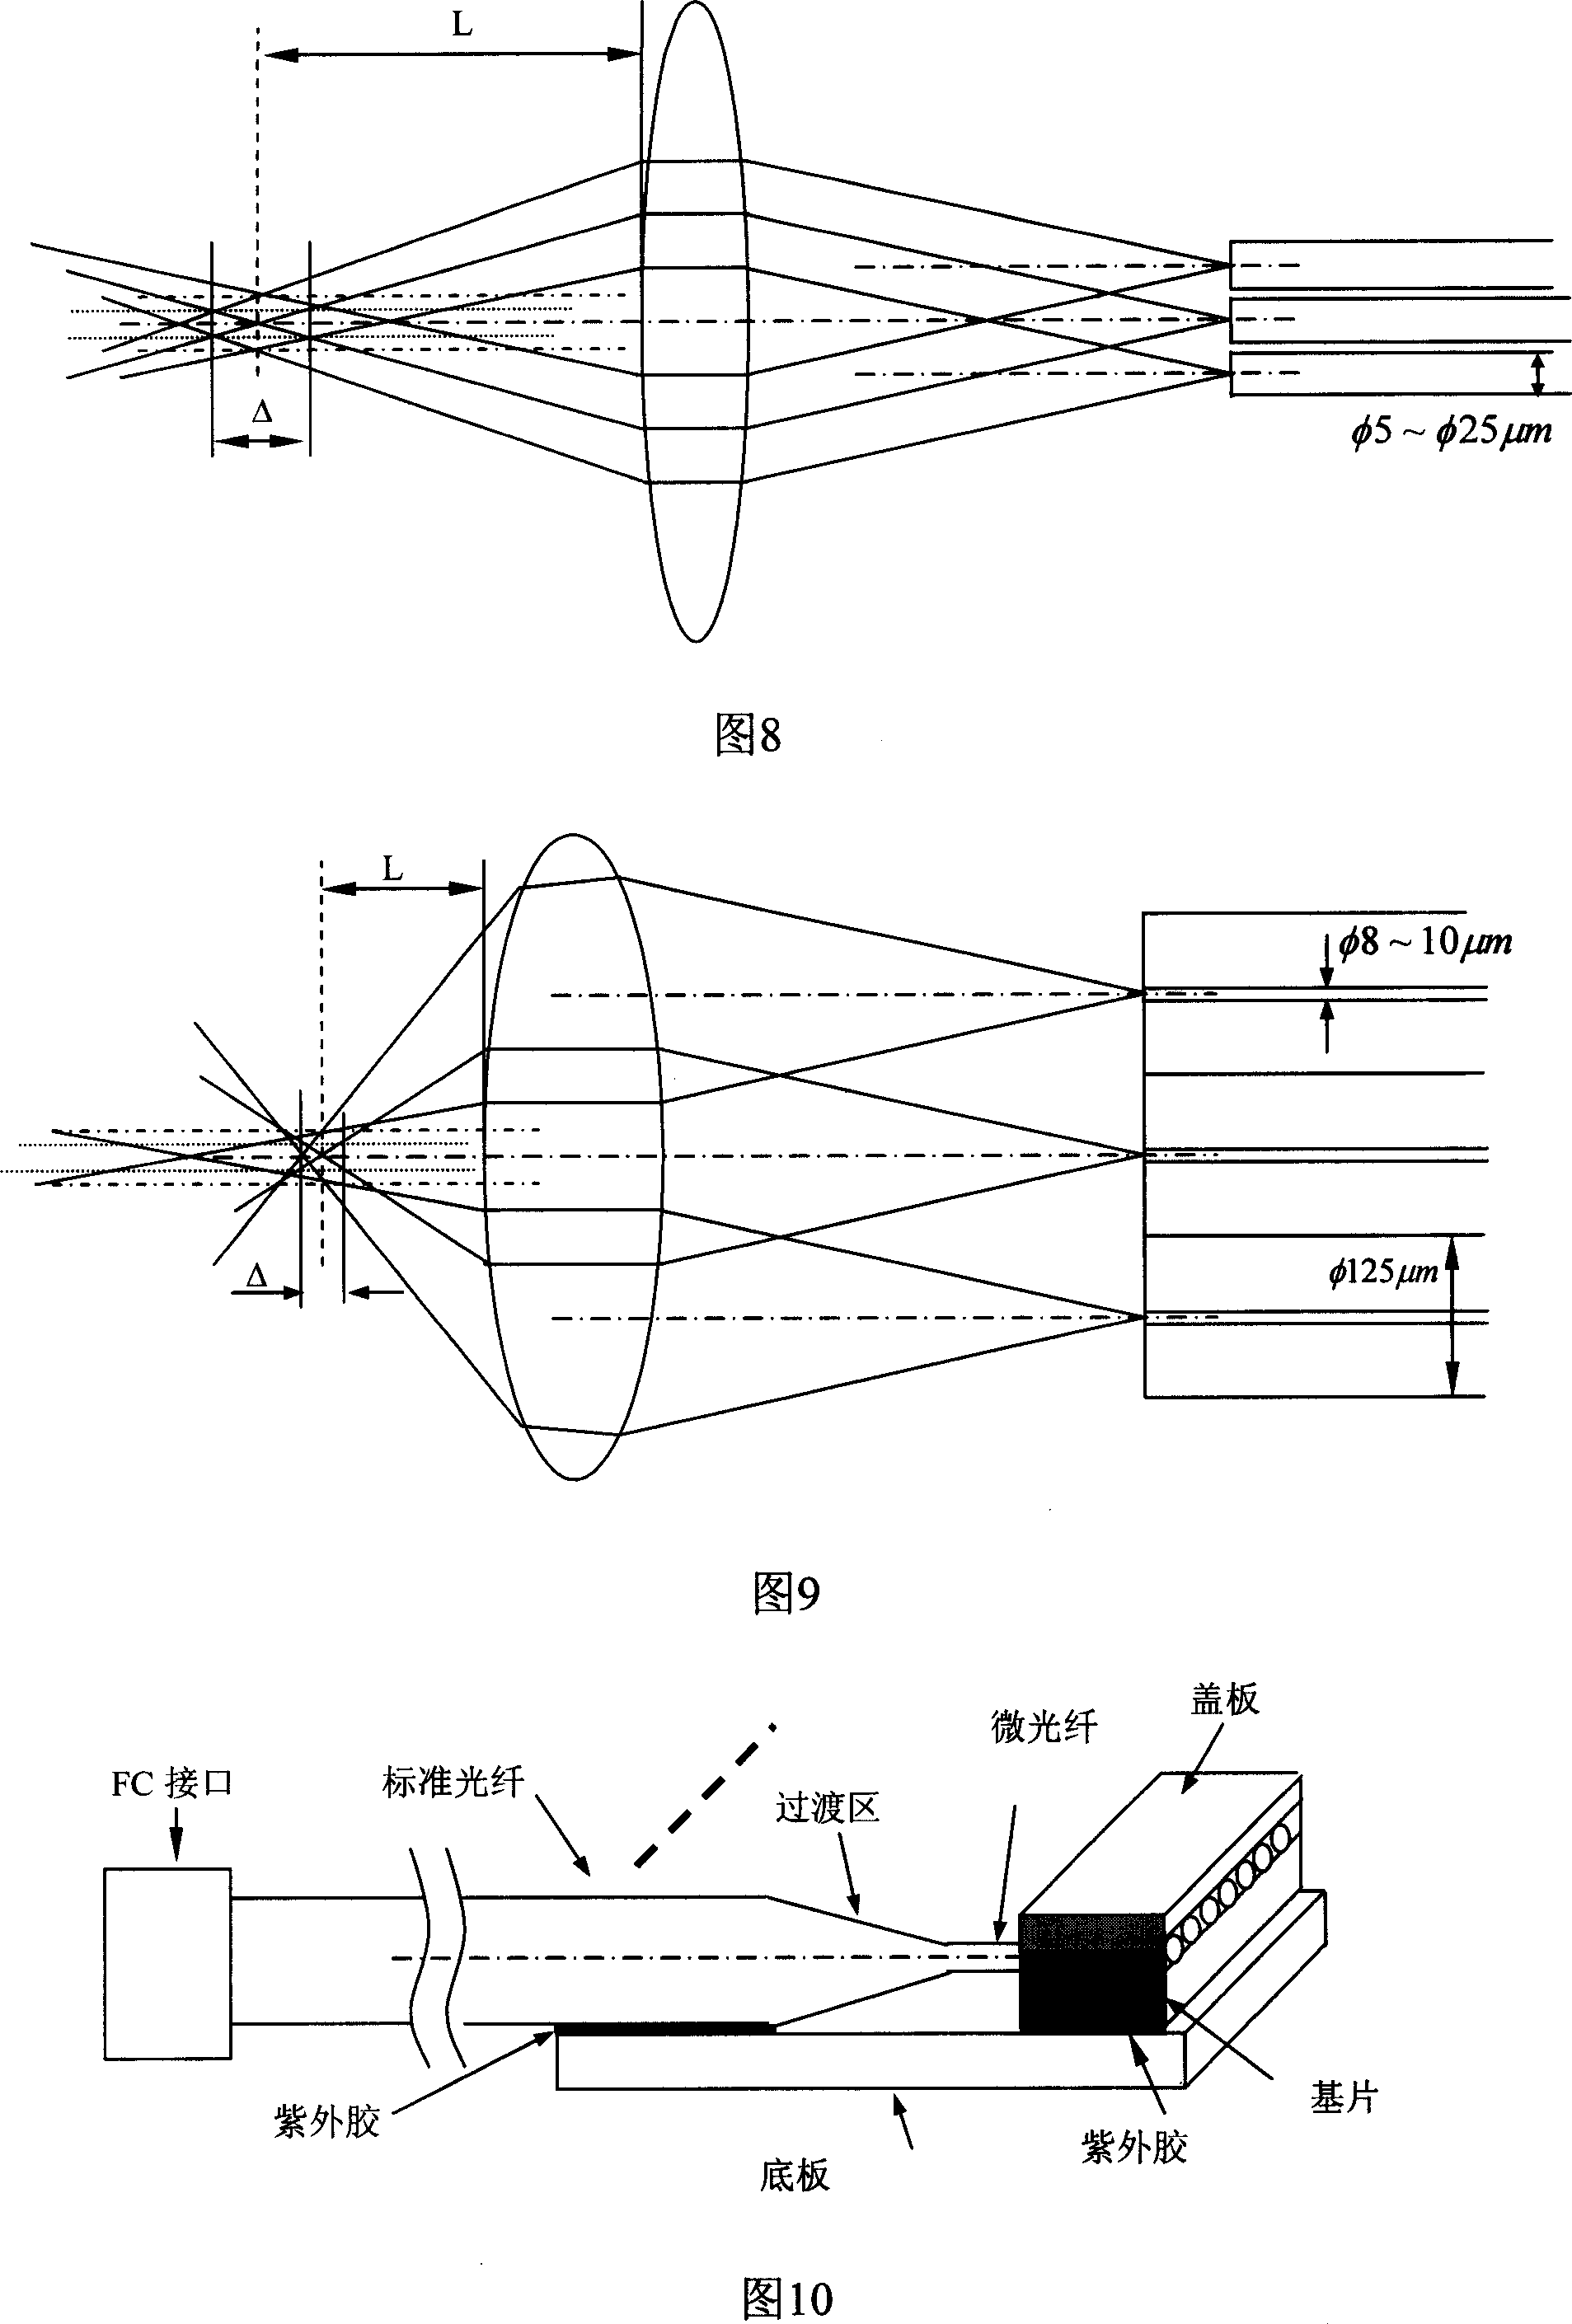 Method for realizing optical point joint seal in optical-fiber close-packed array